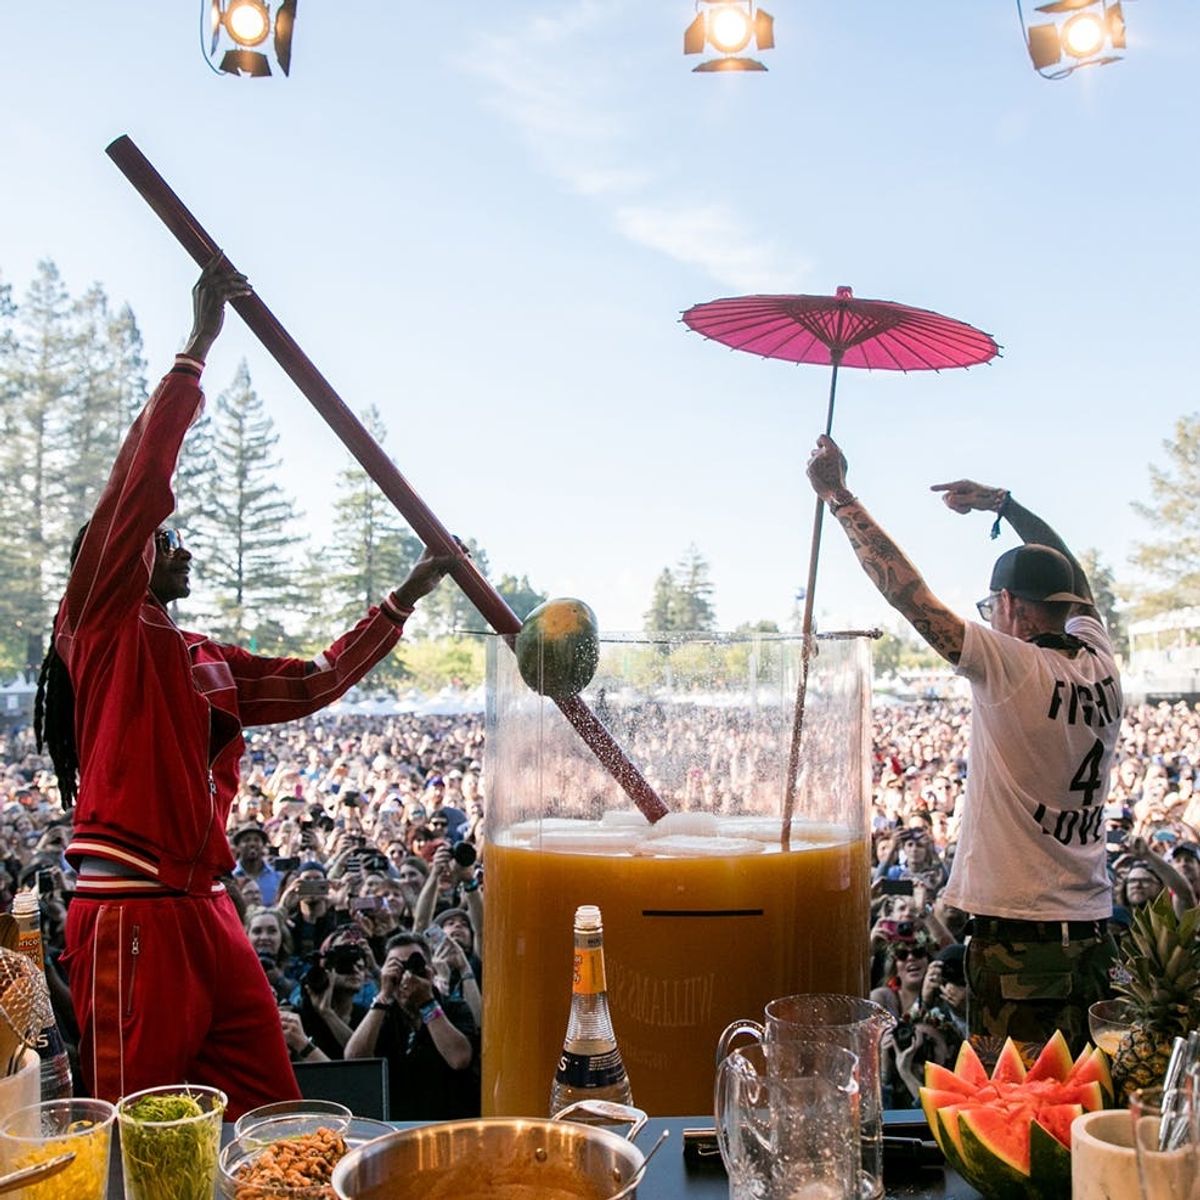 The 20 Craziest Shenanigans from the 2018 Williams Sonoma Culinary Stage at BottleRock